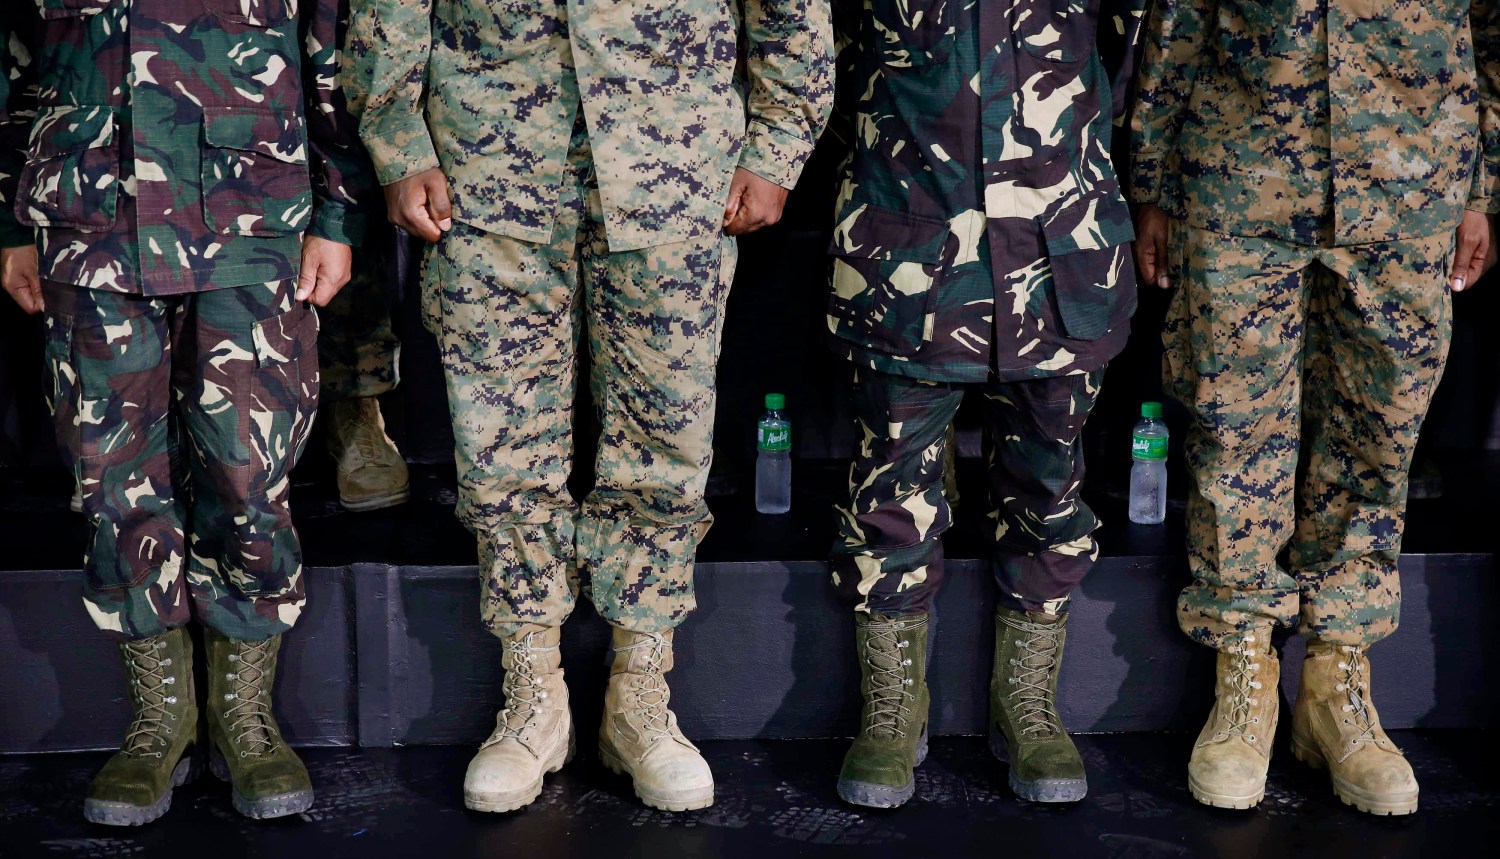 The various boots worn by multi-nation troops are seen as the soldiers listen to U.S. President Barack Obama speak to military troops at the Fort Bonifacio Gymnasium in Manila, April 29, 2014. REUTERS/Larry Downing (PHILIPPINES - Tags: POLITICS)